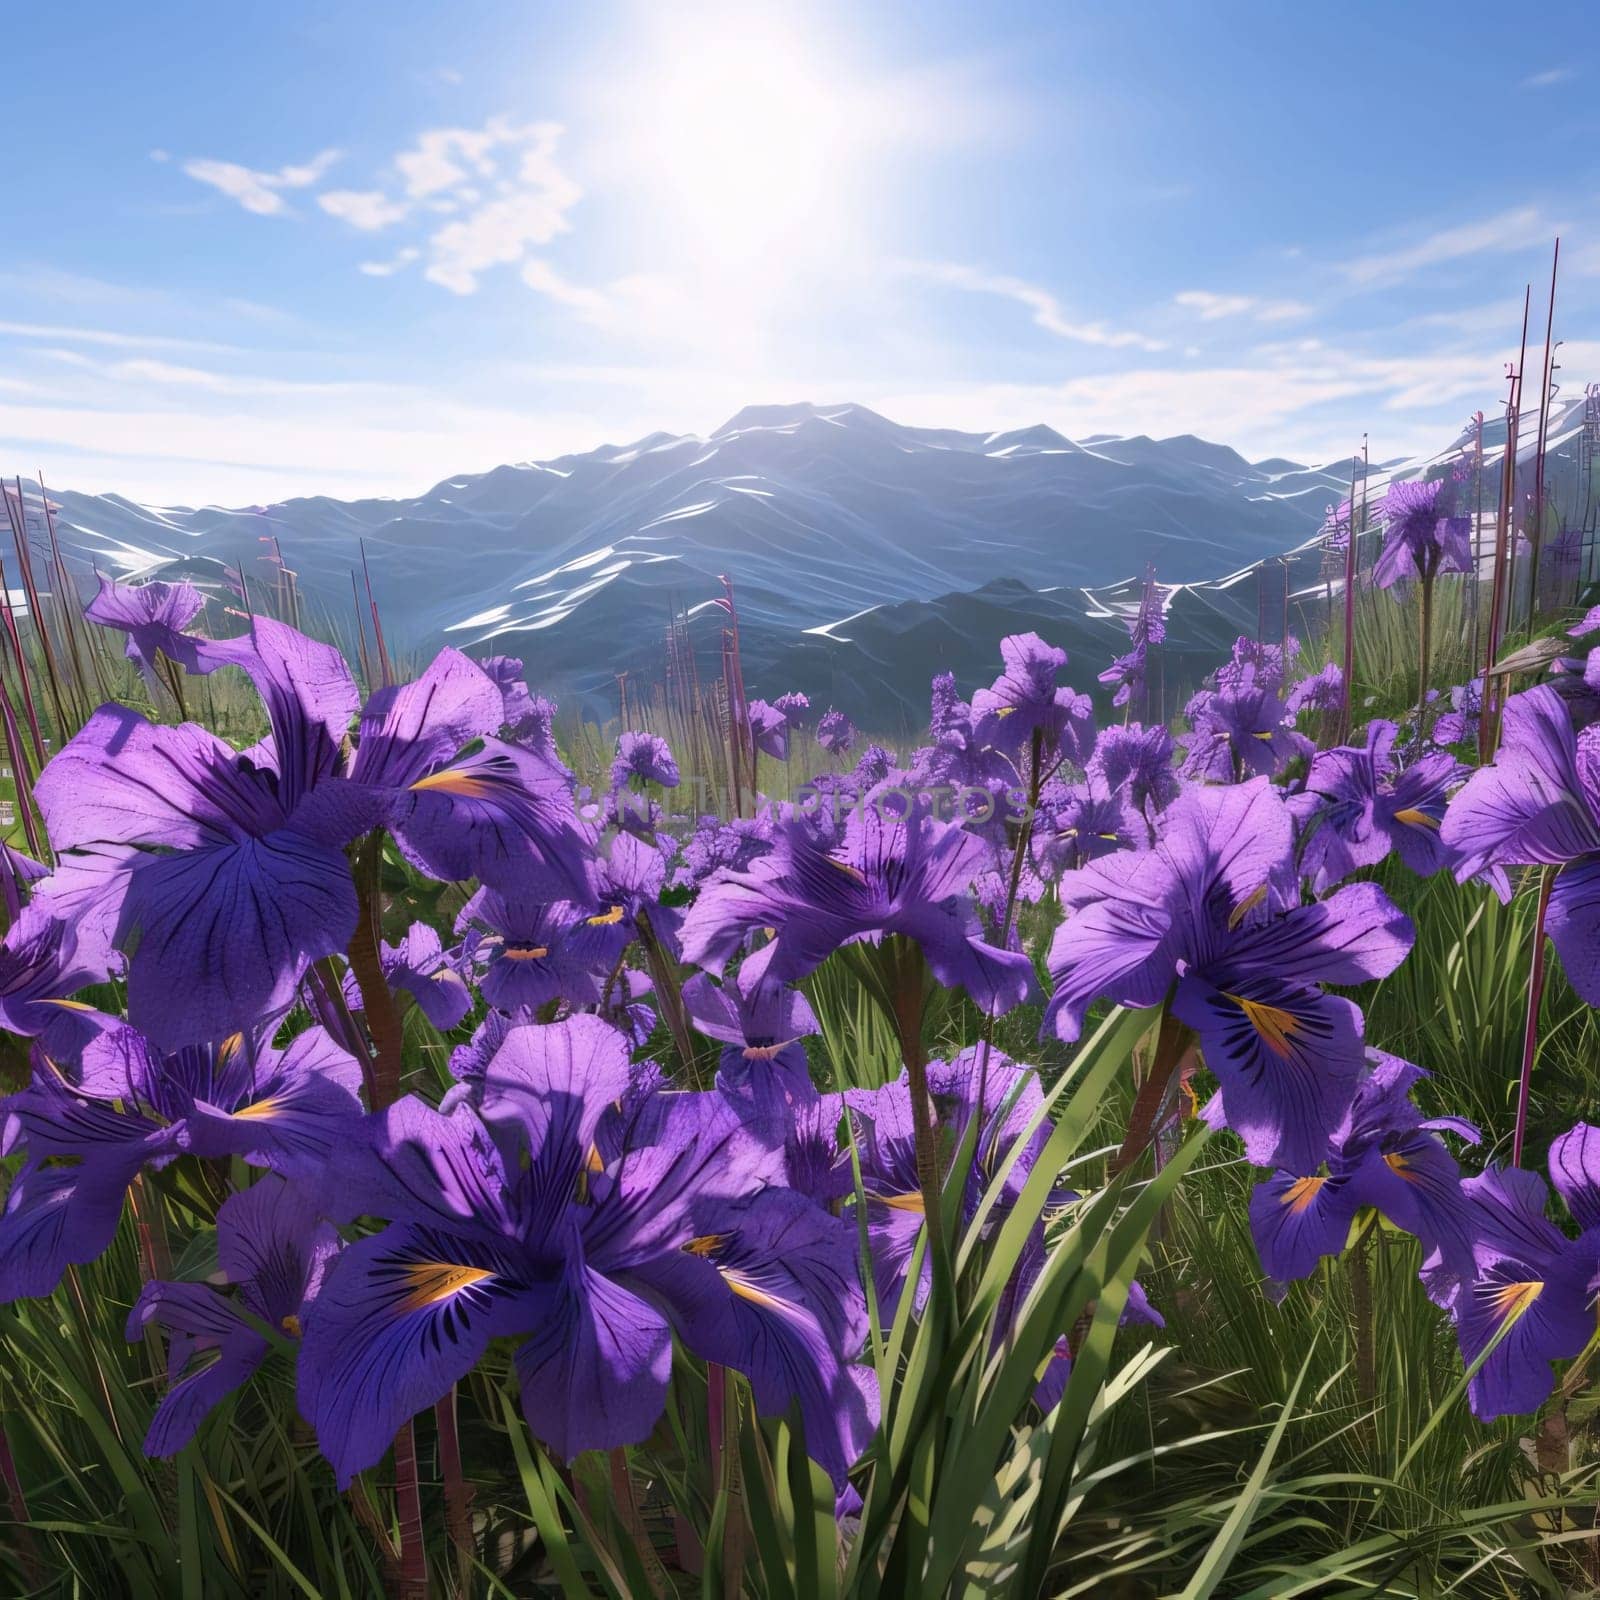 Purple flowers with Green stems kami in the meadow in the background high mountain ranges covered with snow. Flowering flowers, a symbol of spring, new life. A joyful time of nature waking up to life.